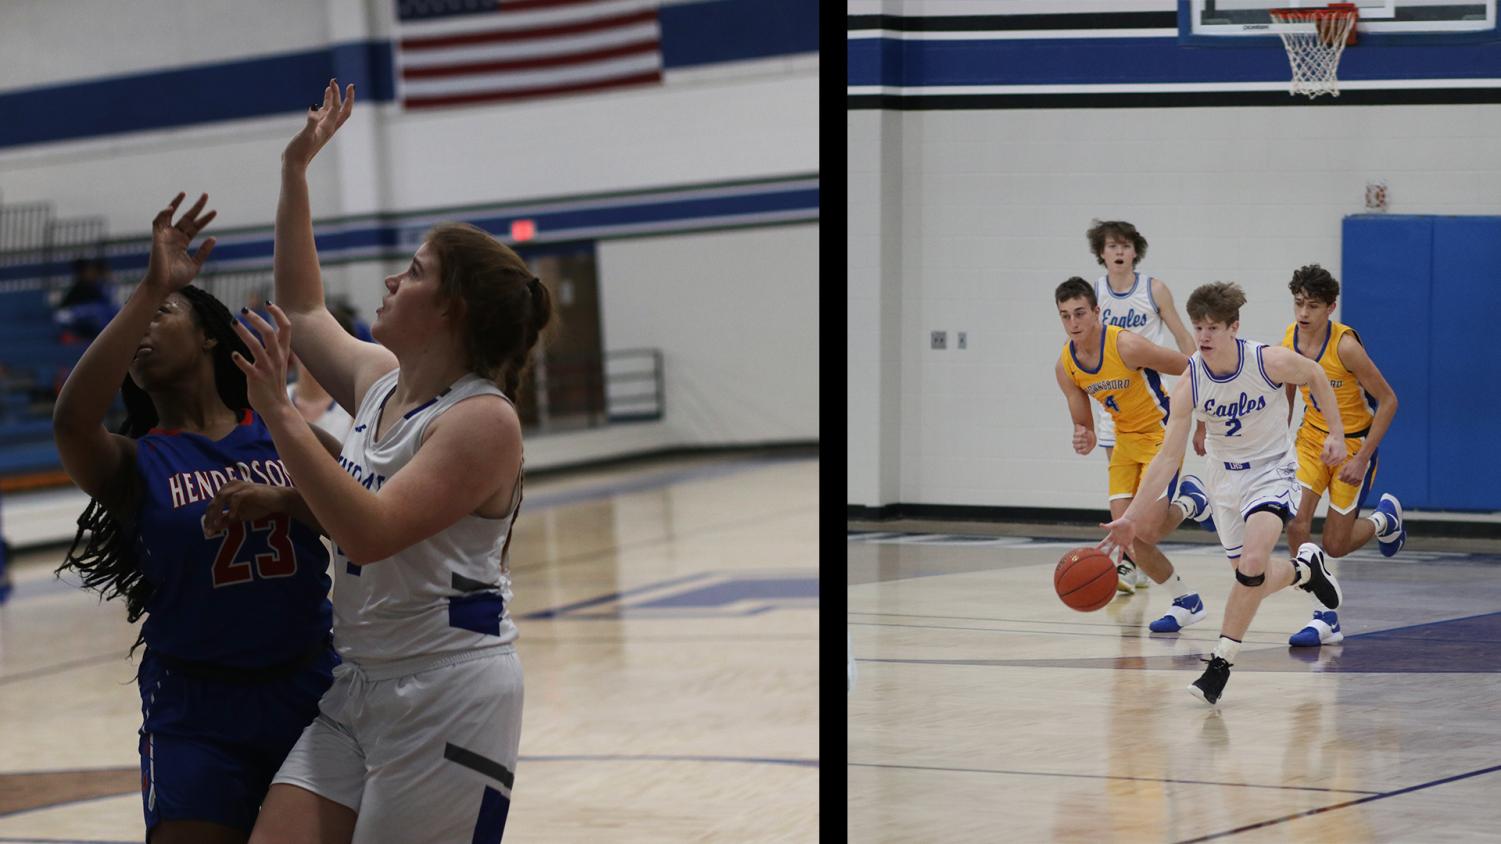 Seniors Elizabeth Hutchens and Colton Taylor both compete on the varsity basketball teams. I just love the camaraderie of the team, Hutchens said. Theres nothing like having that team to celebrate wins and mourn losses.